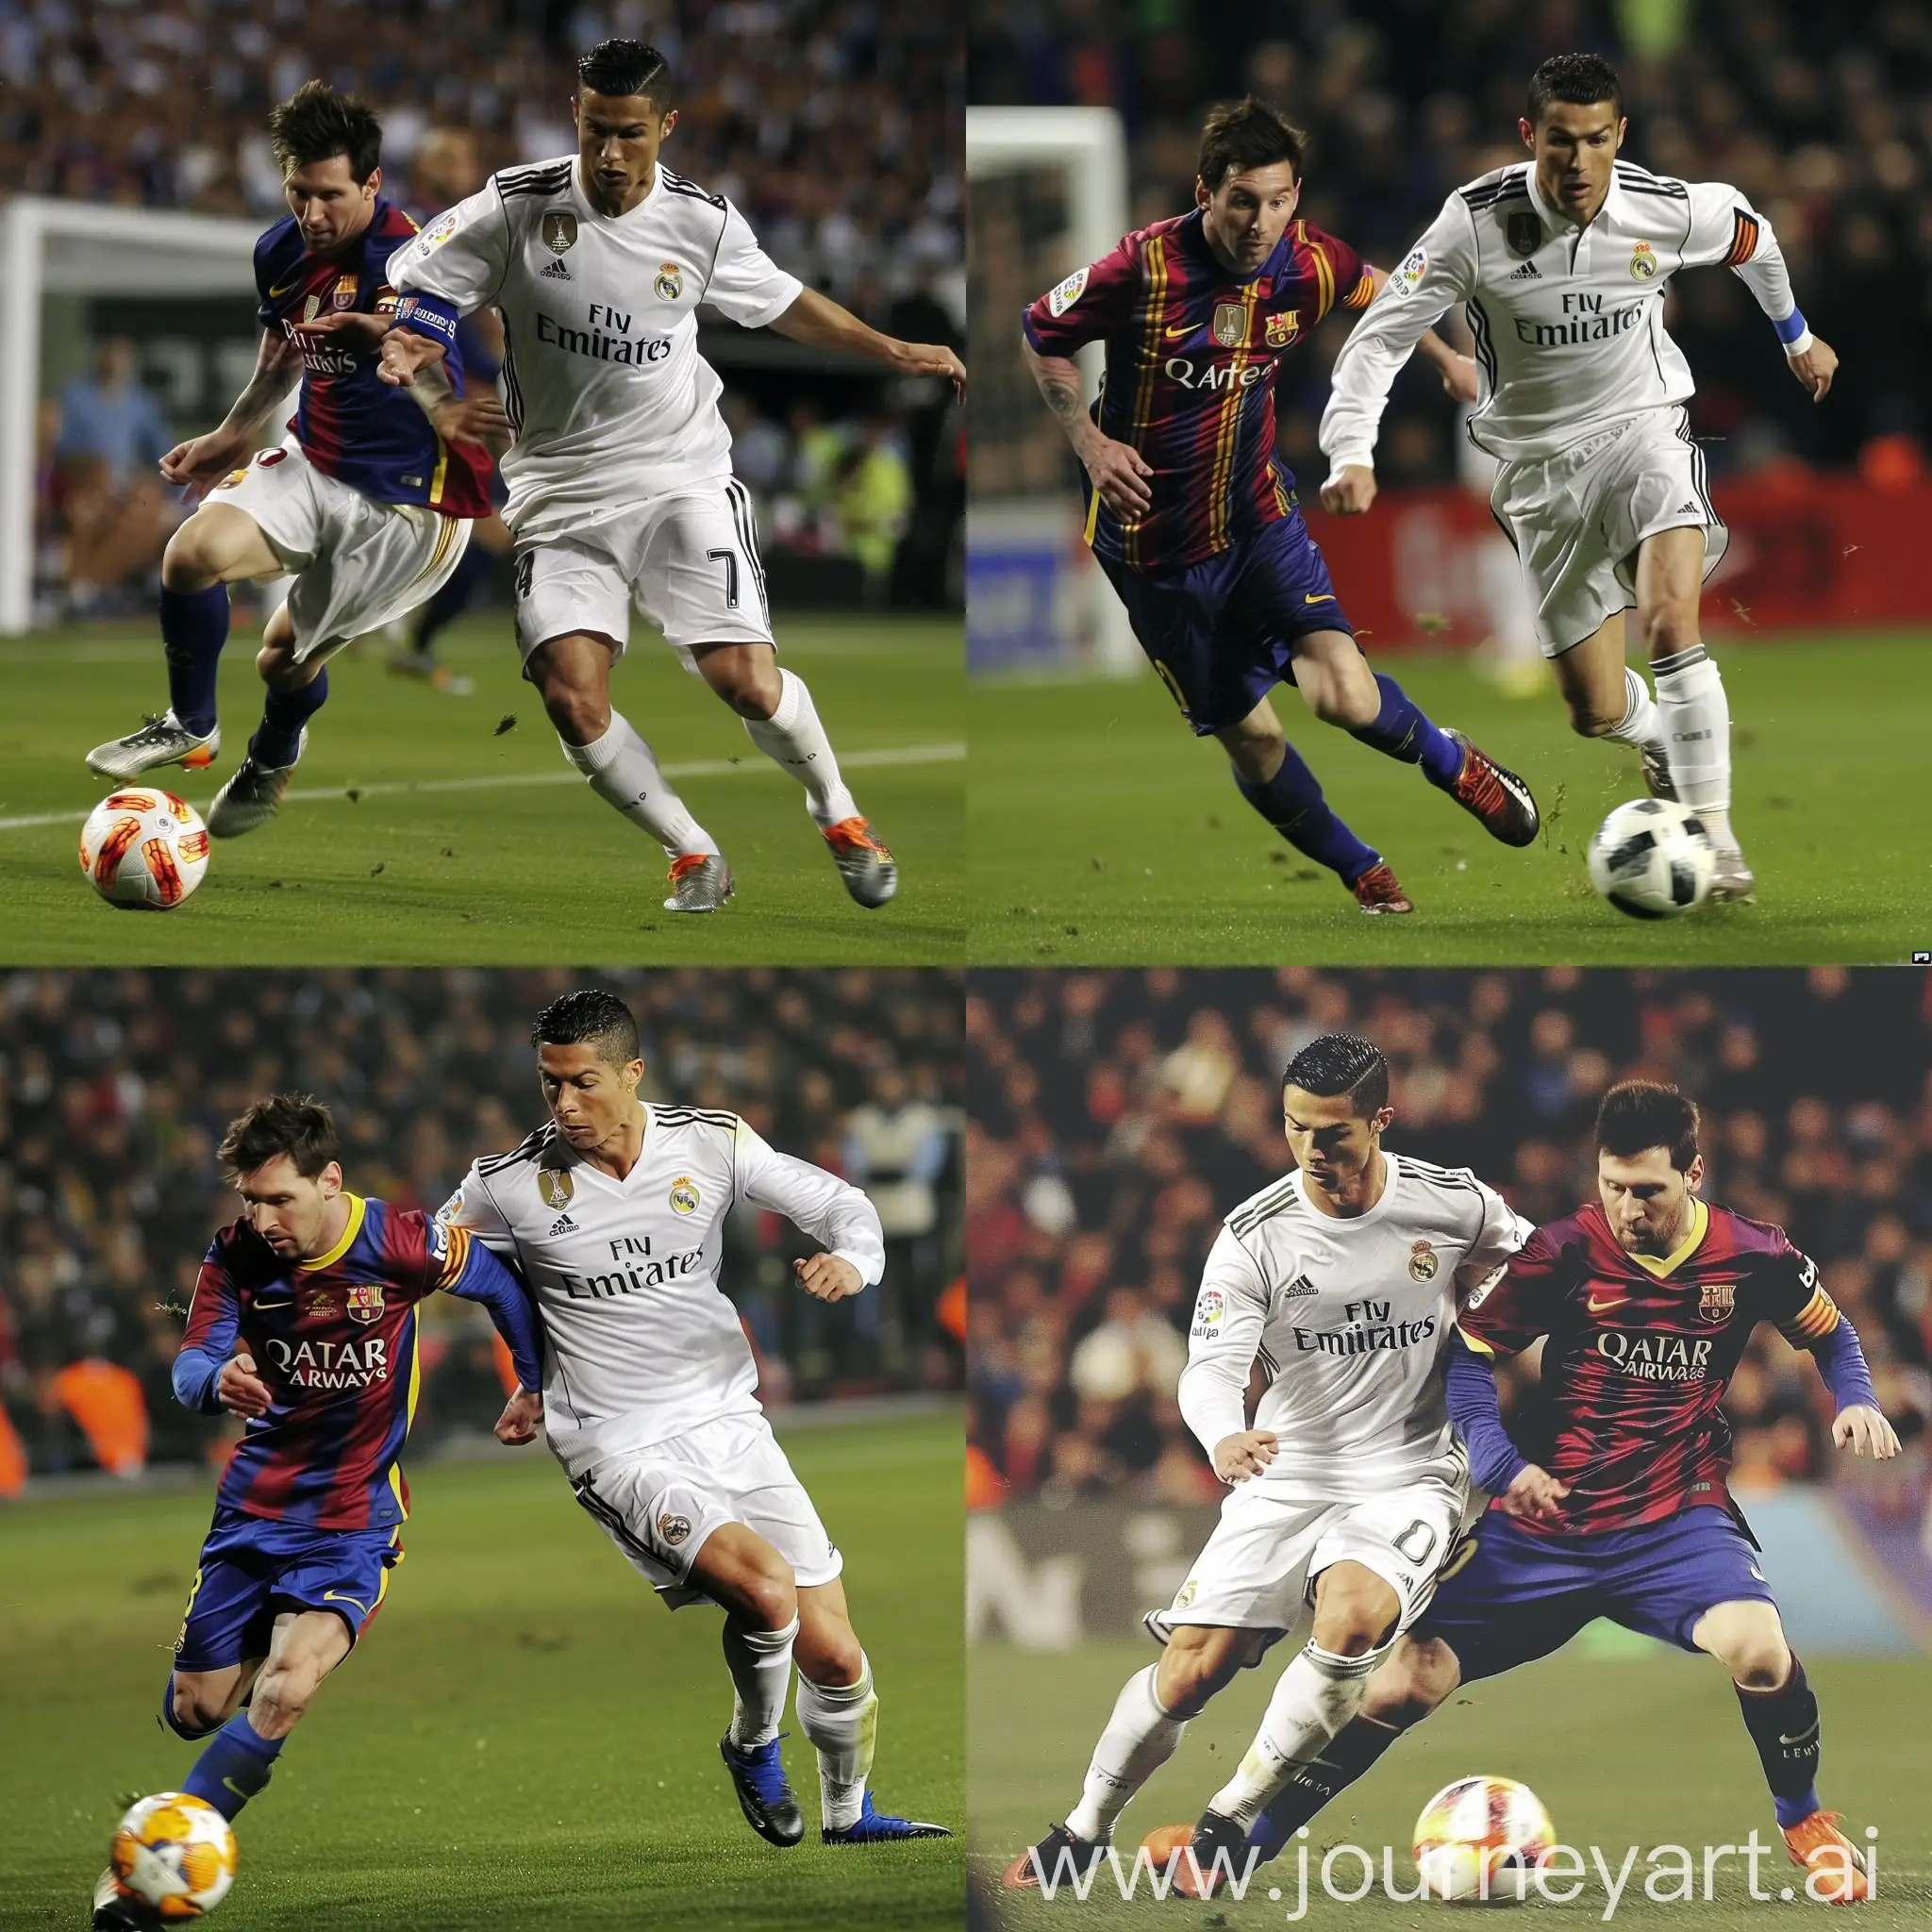 Cristiano-Ronaldo-Outmaneuvers-Messi-in-Intense-Soccer-Duel